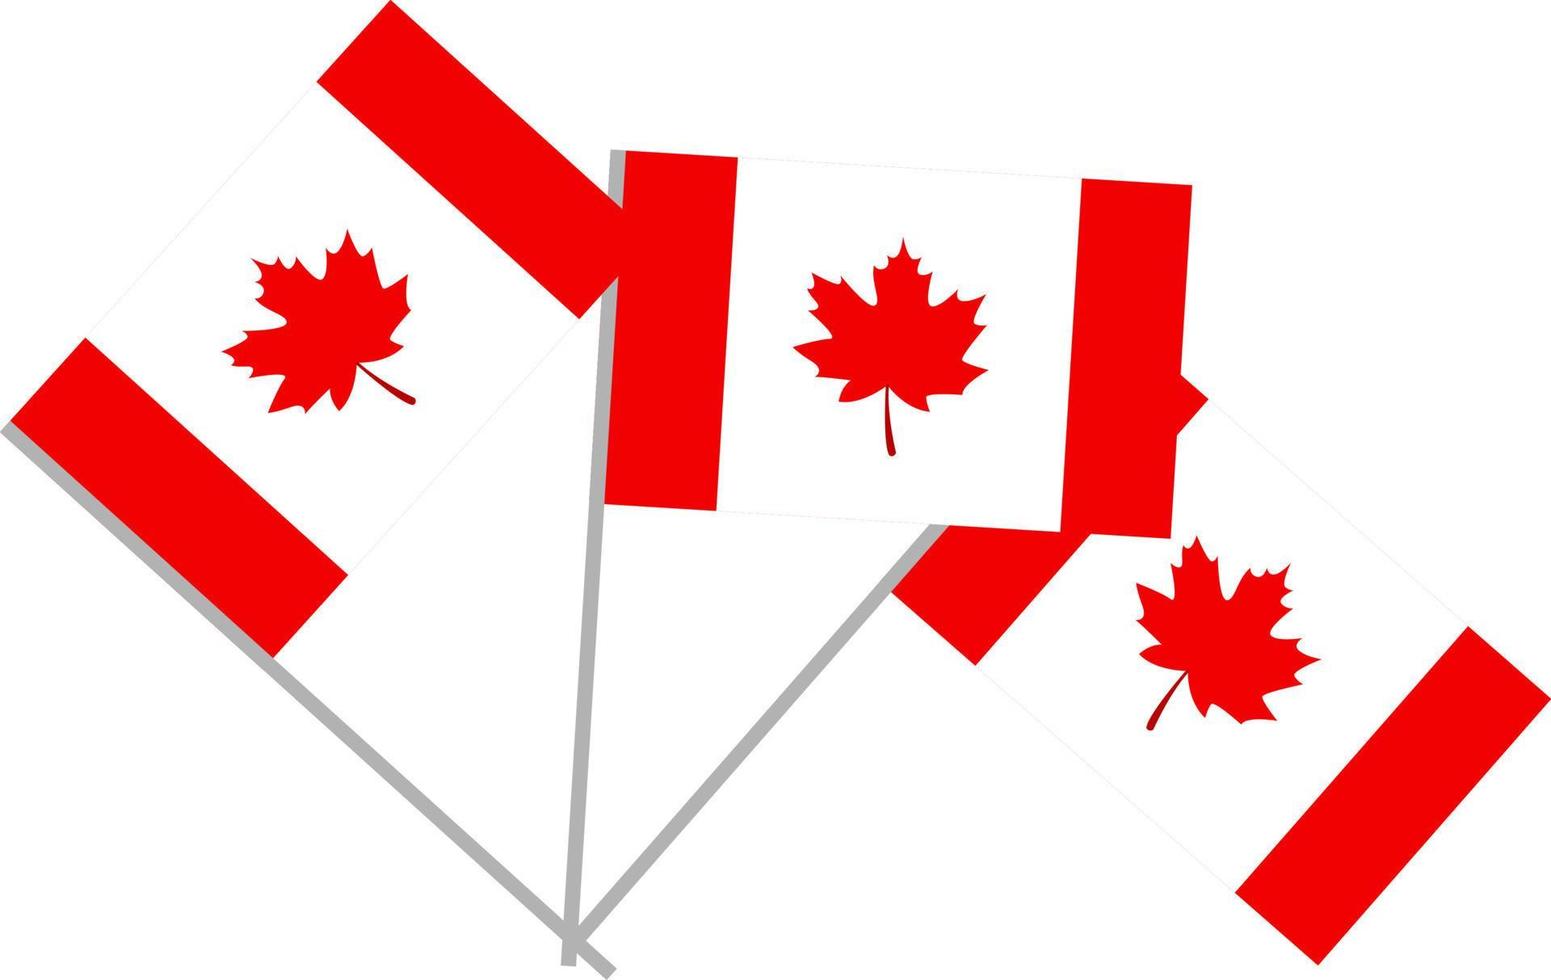 Canadian flags, illustration, vector on white background.